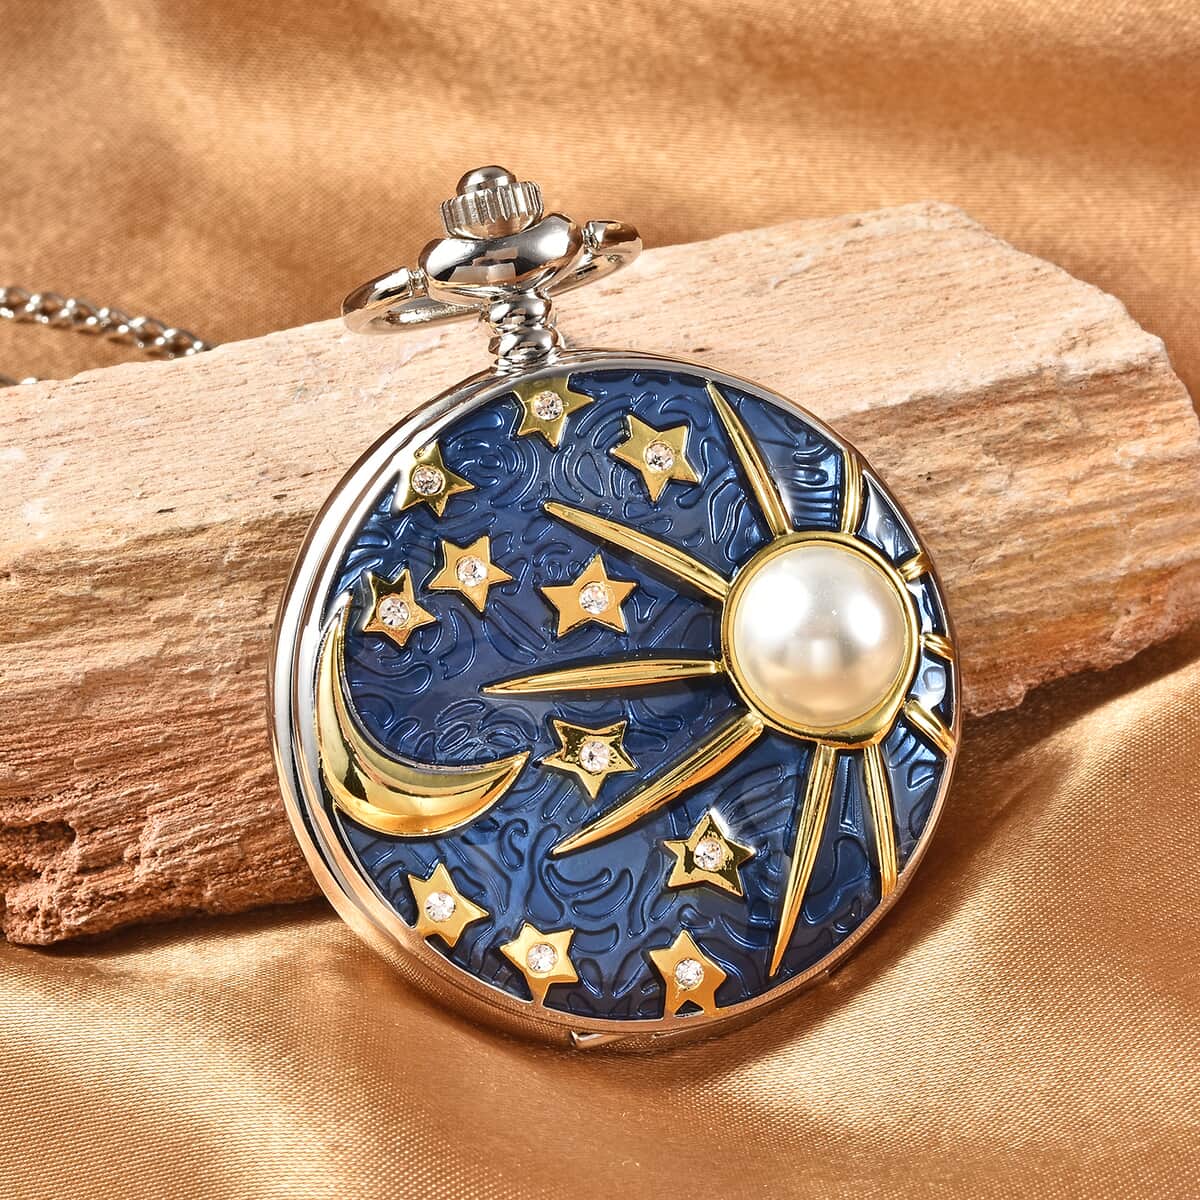 Strada White Crystal Japanese Movement Carving Moon & Star Pattern Pocket Watch in Goldtone with Chain in Silvertone 31 Inches image number 1